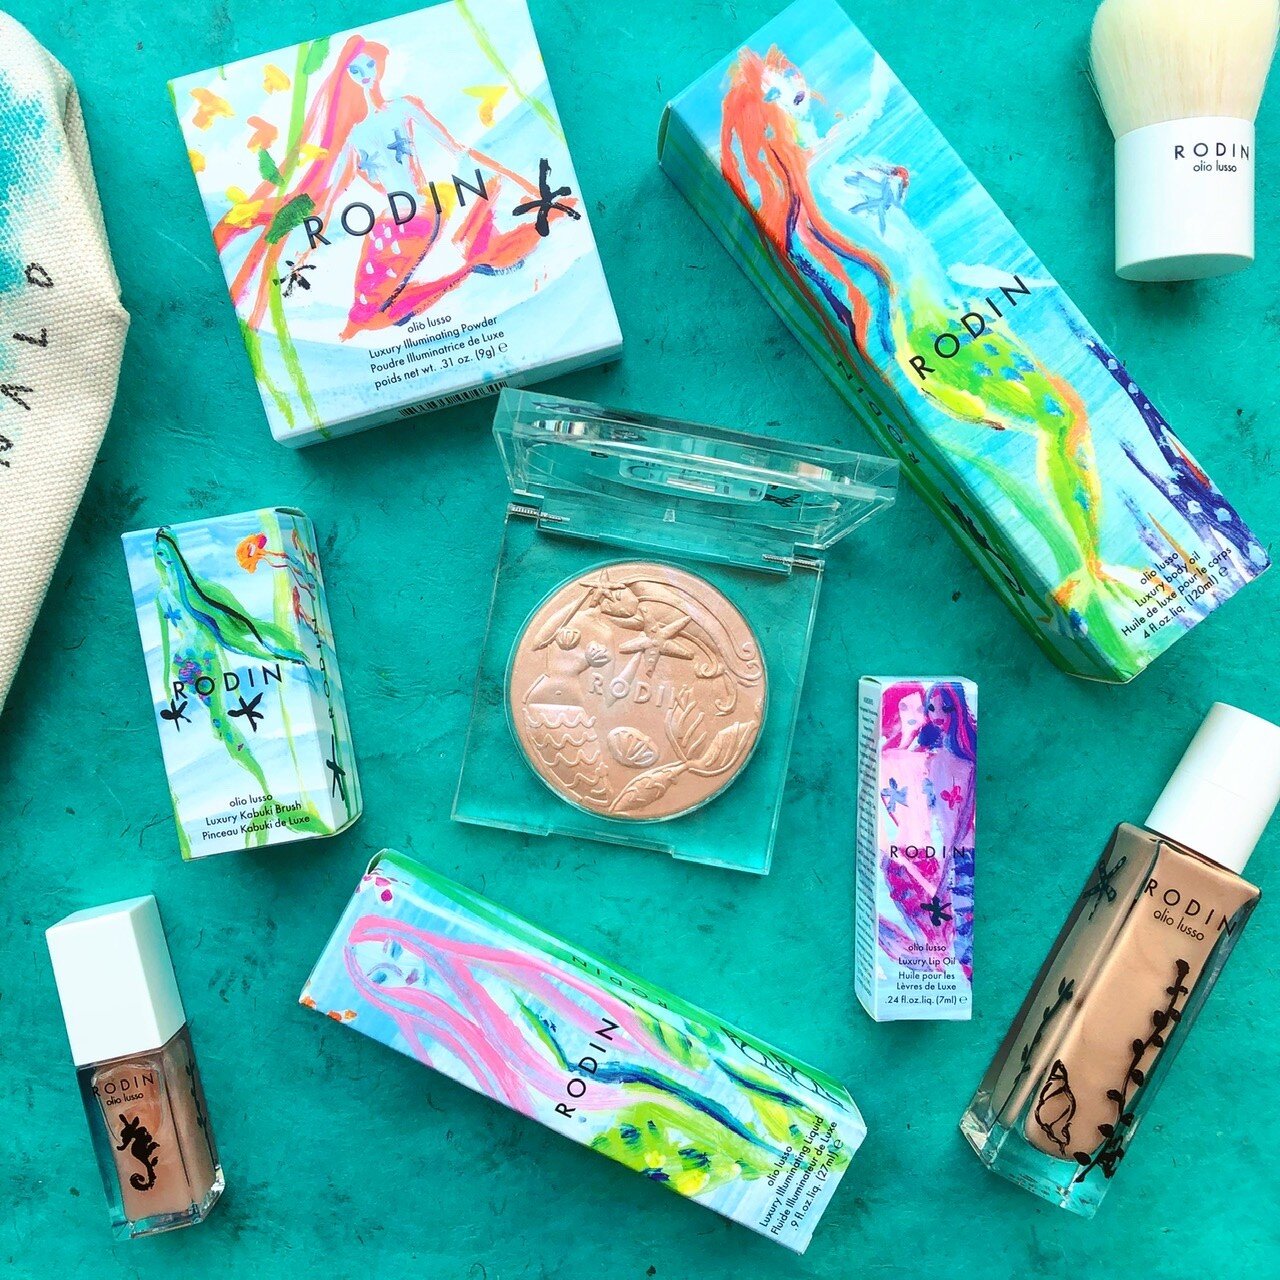   Highlighting Powder, Lip Oil, Face and Body Oil and Liquid Highlighter Rodin Olio Lusso  Summer 2018   Rodin Olio Lusso teamed up with fashion illustrator Donald Robertson to create a whimsical, mermaid-laden underwater fantasy for the packaging of